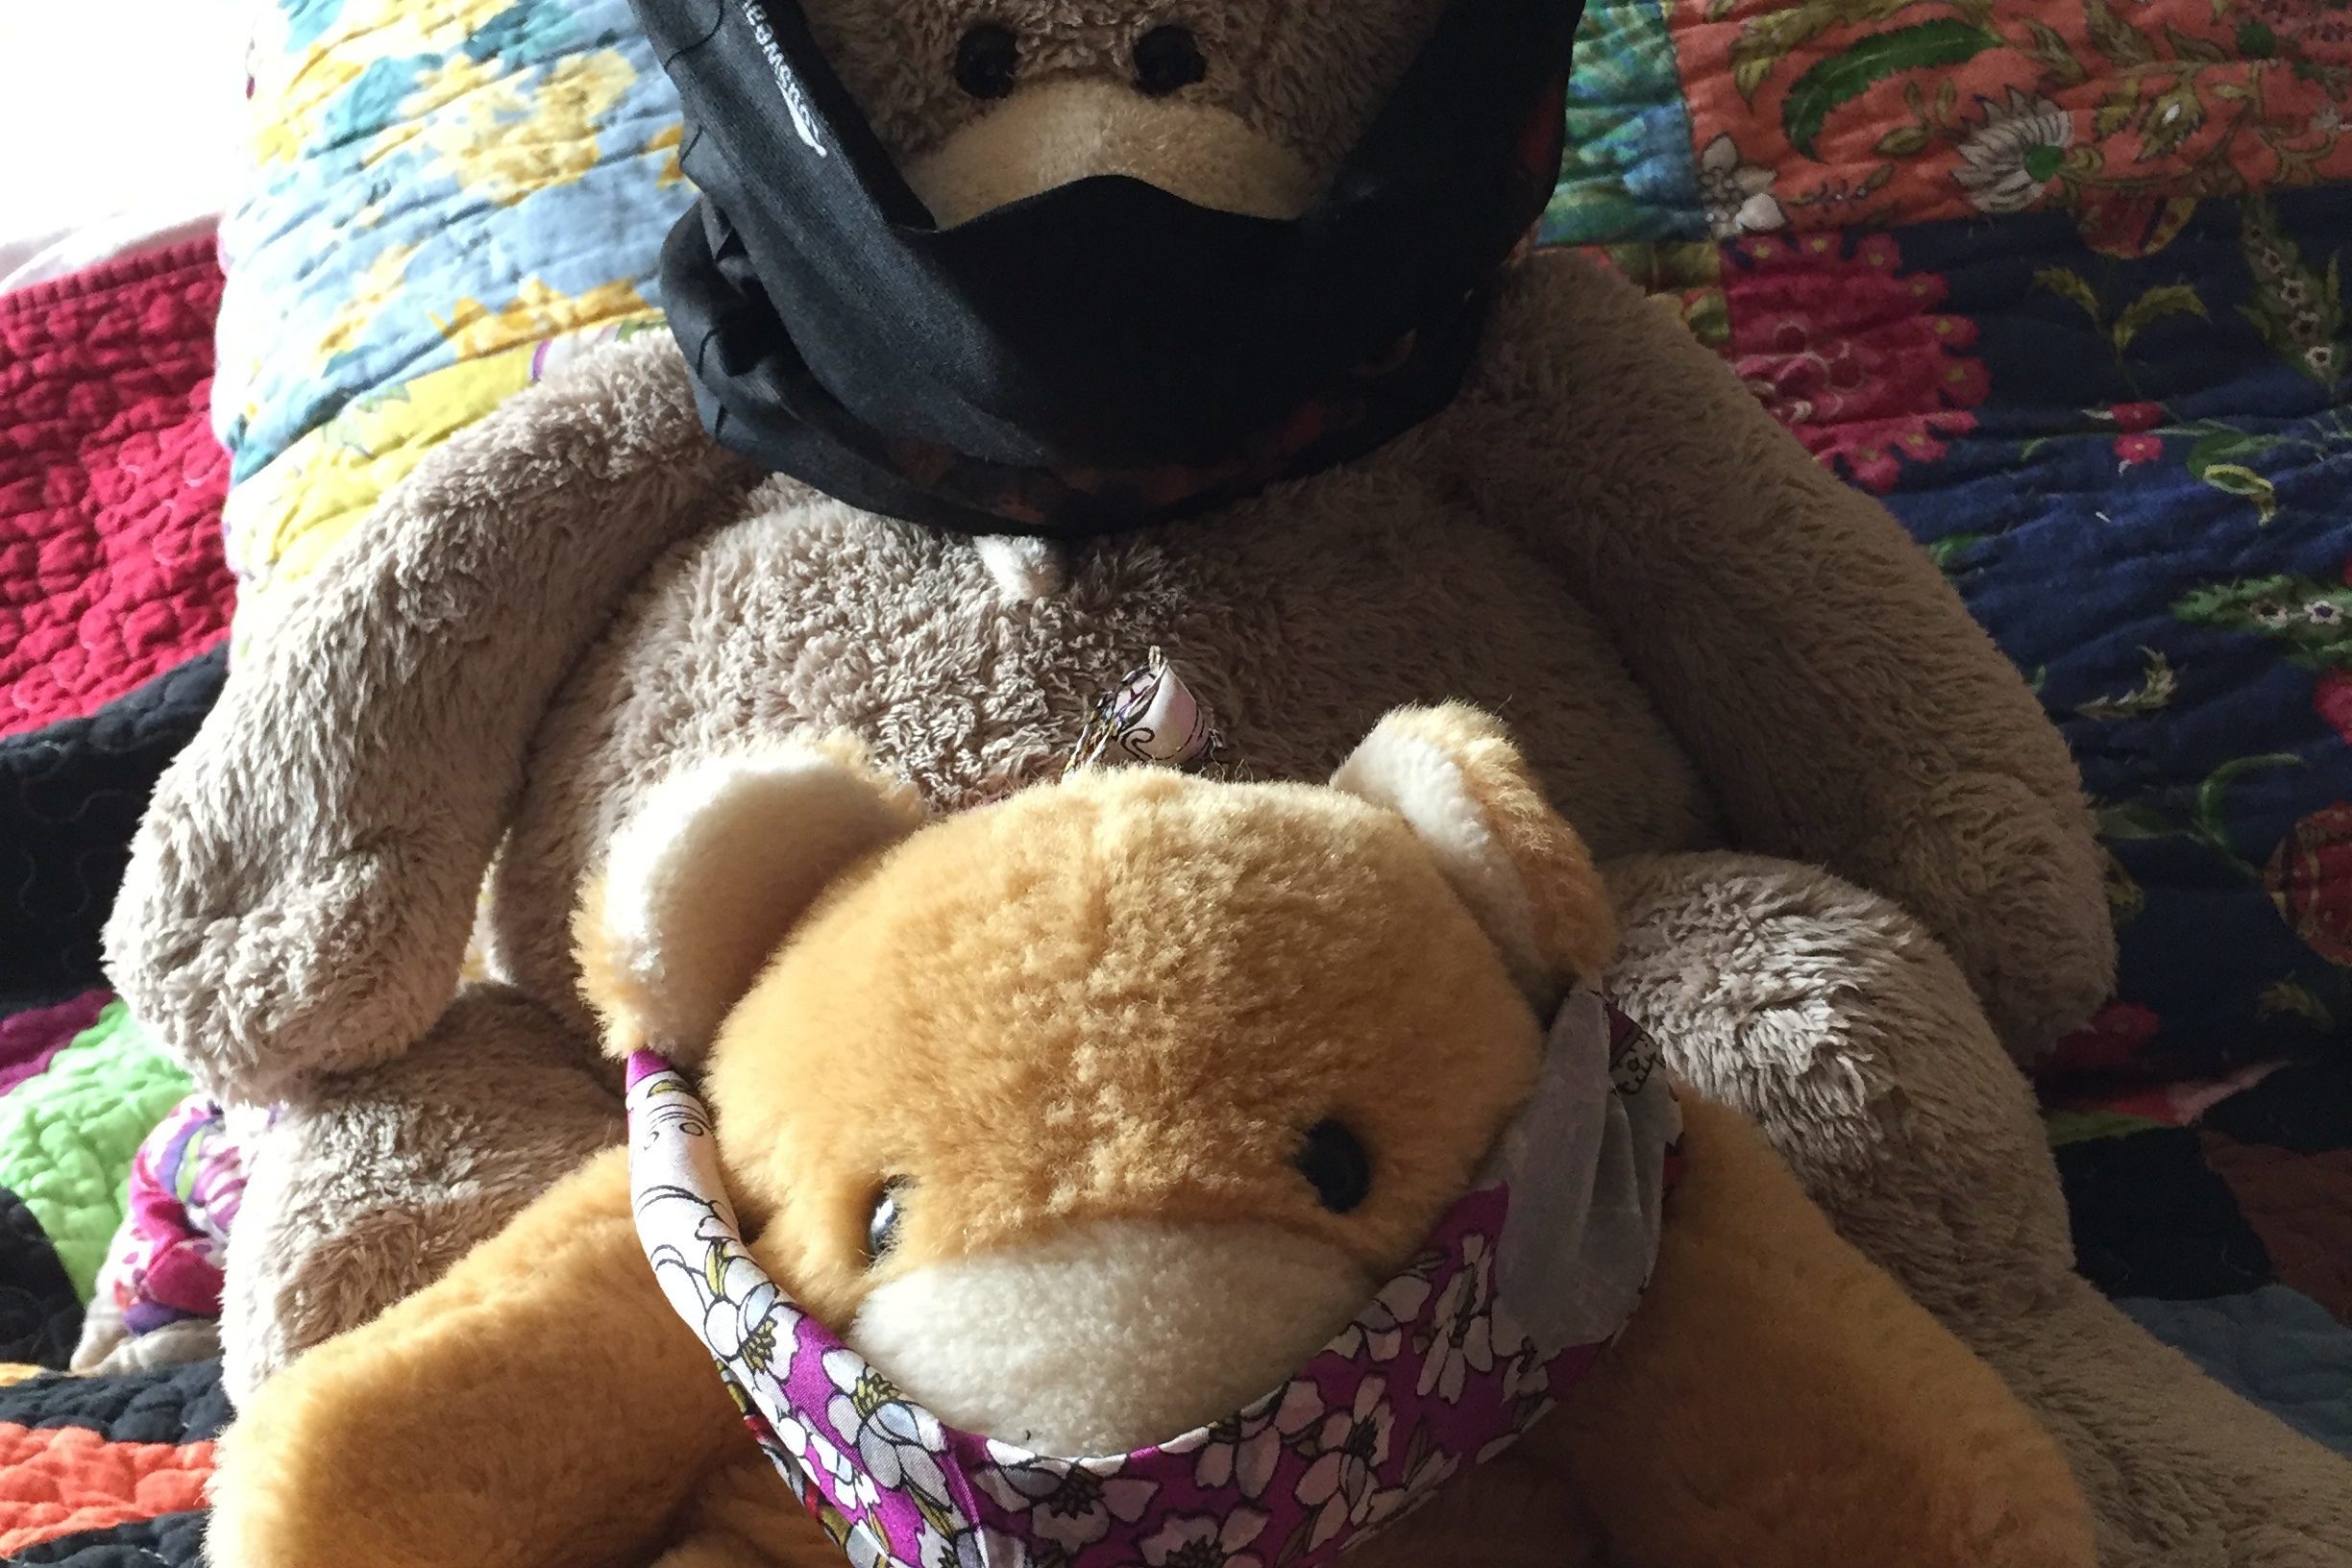 Two bears wearing face coverings